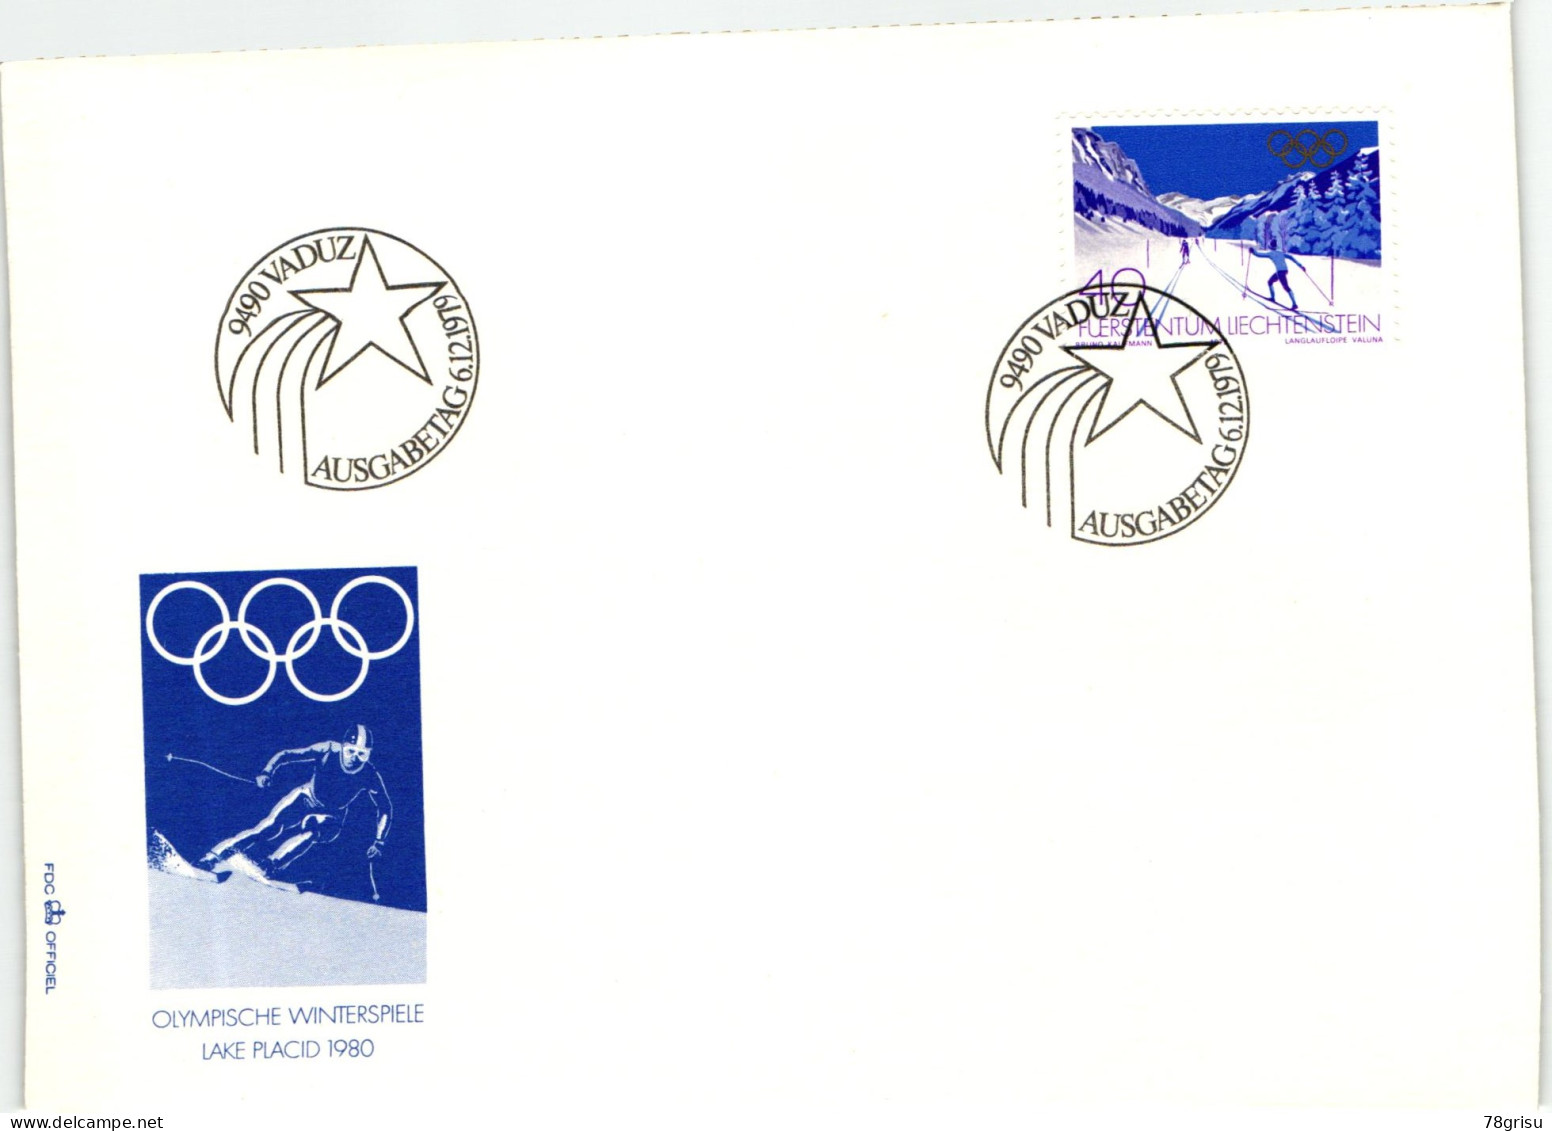 Liechtenstein, Lake Placid 1980 Olympic Games, 2 Briefe, Langlauf, Sessellift, Olympische Spiele - Hiver 1980: Lake Placid